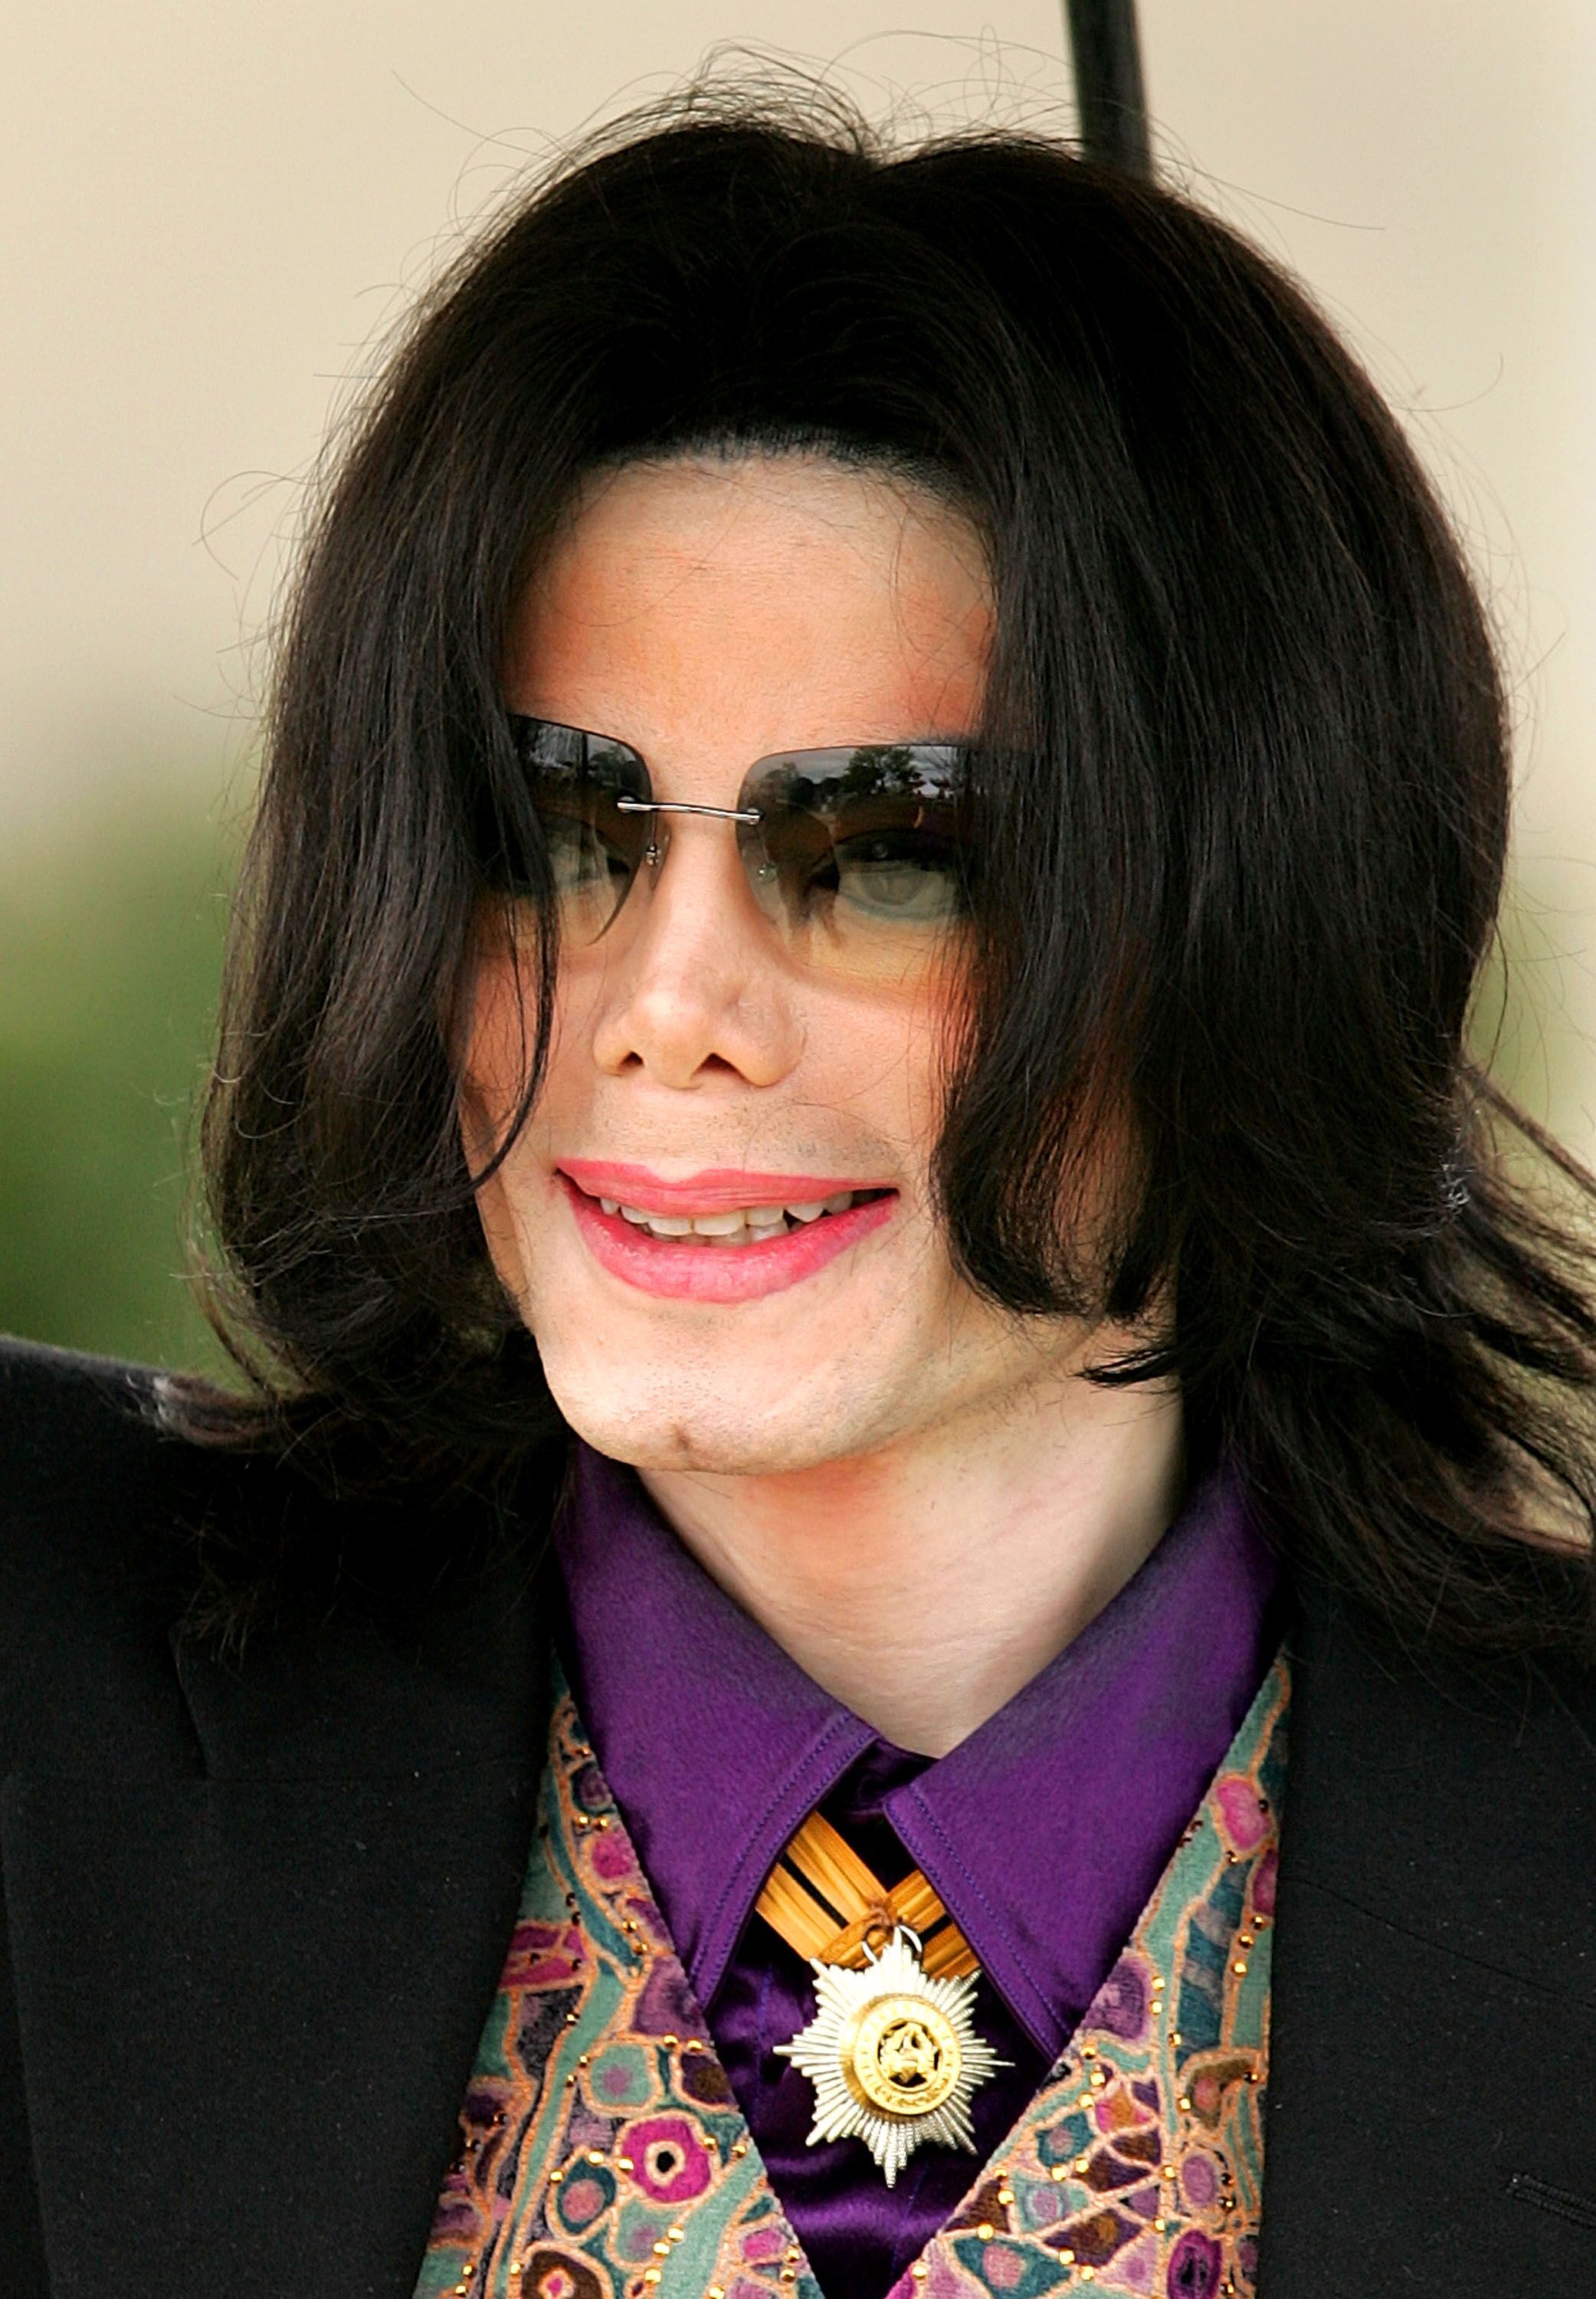 Michael Jackson walks out of court on March 3, 2005 in Santa Maria, California | Photo: Getty Images